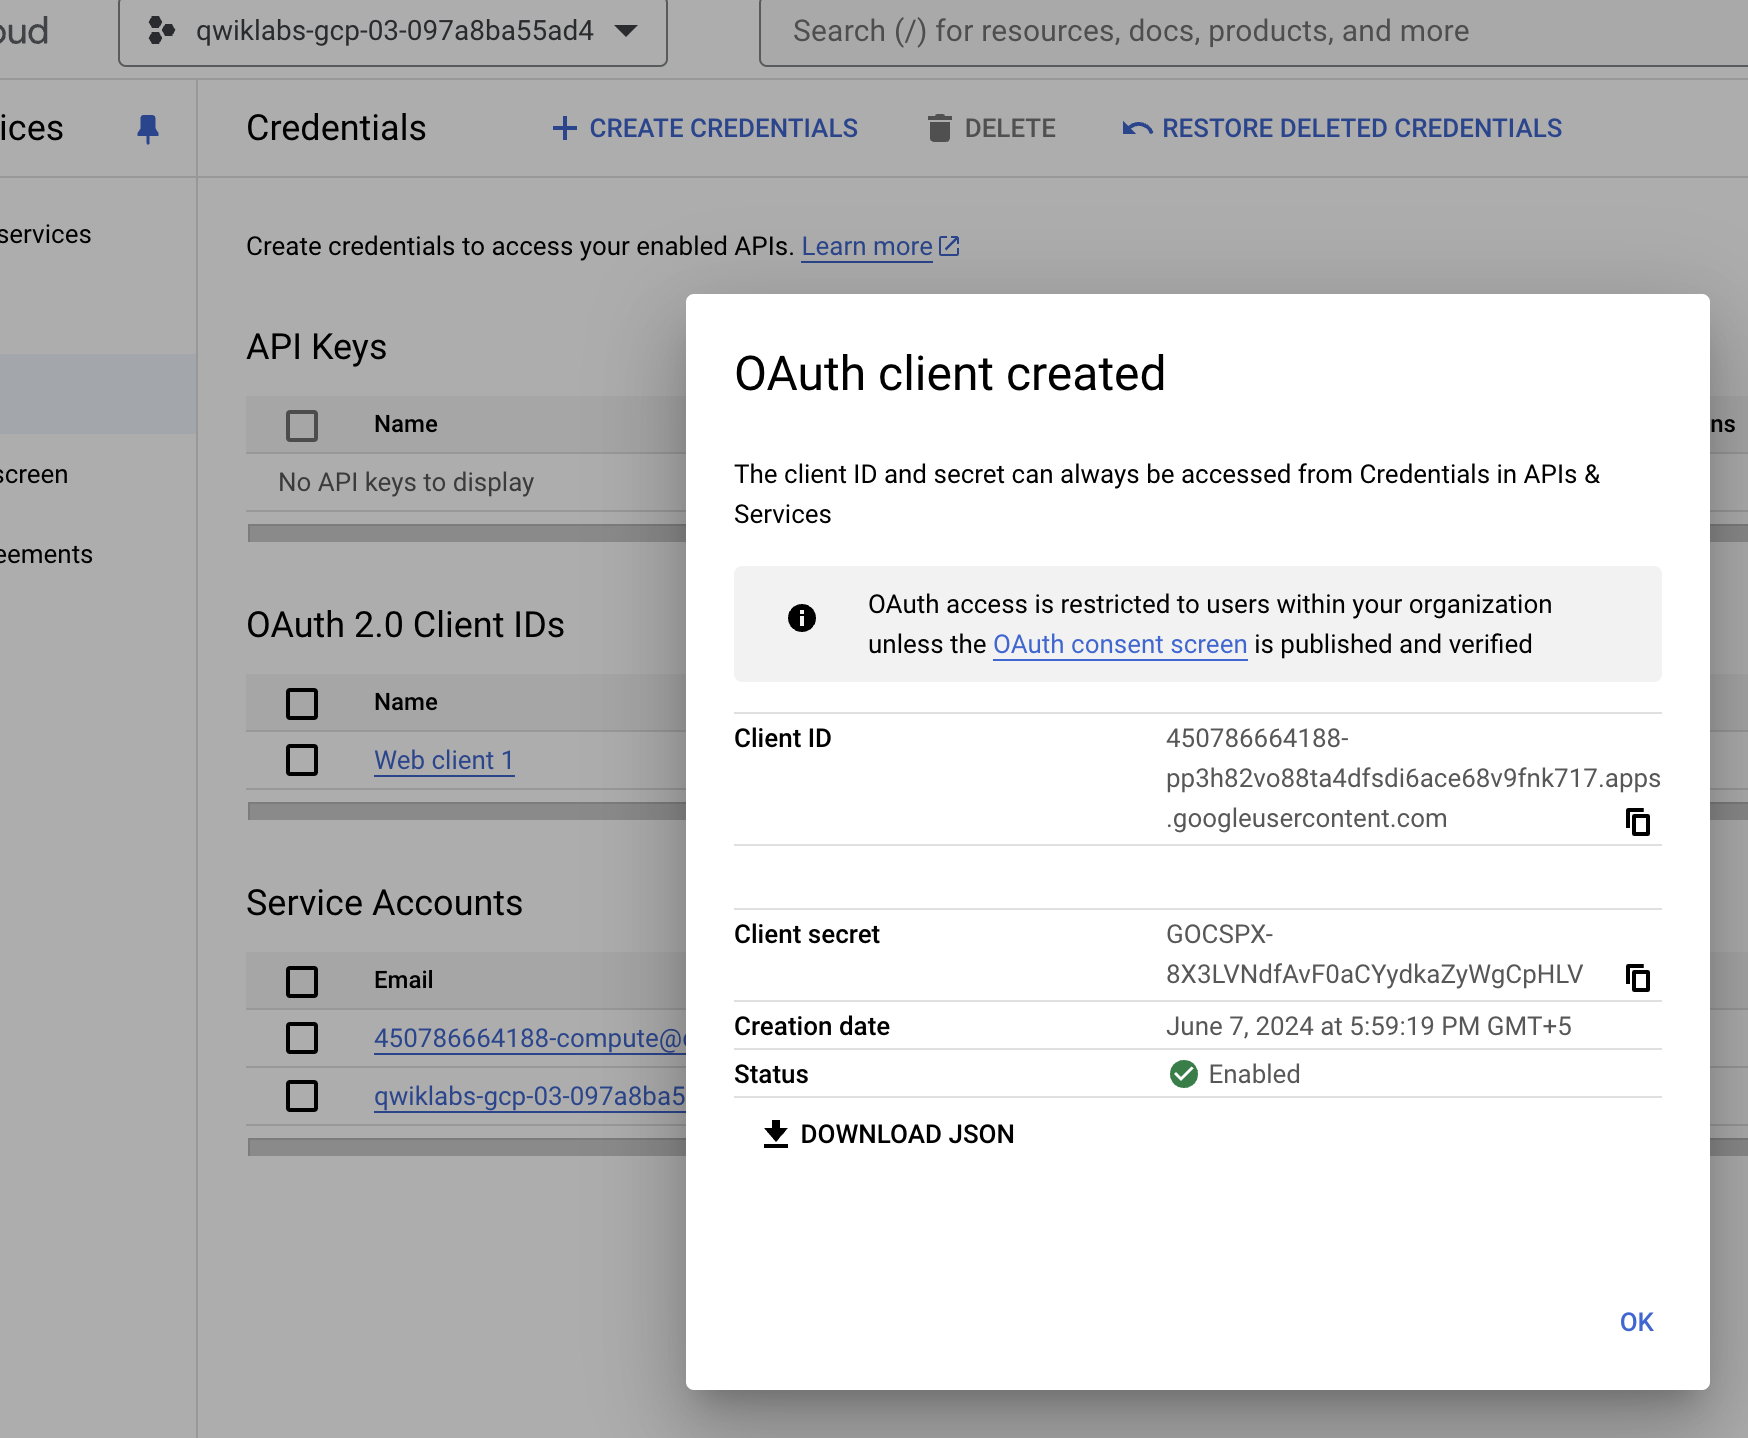 OAuth consent screen app information